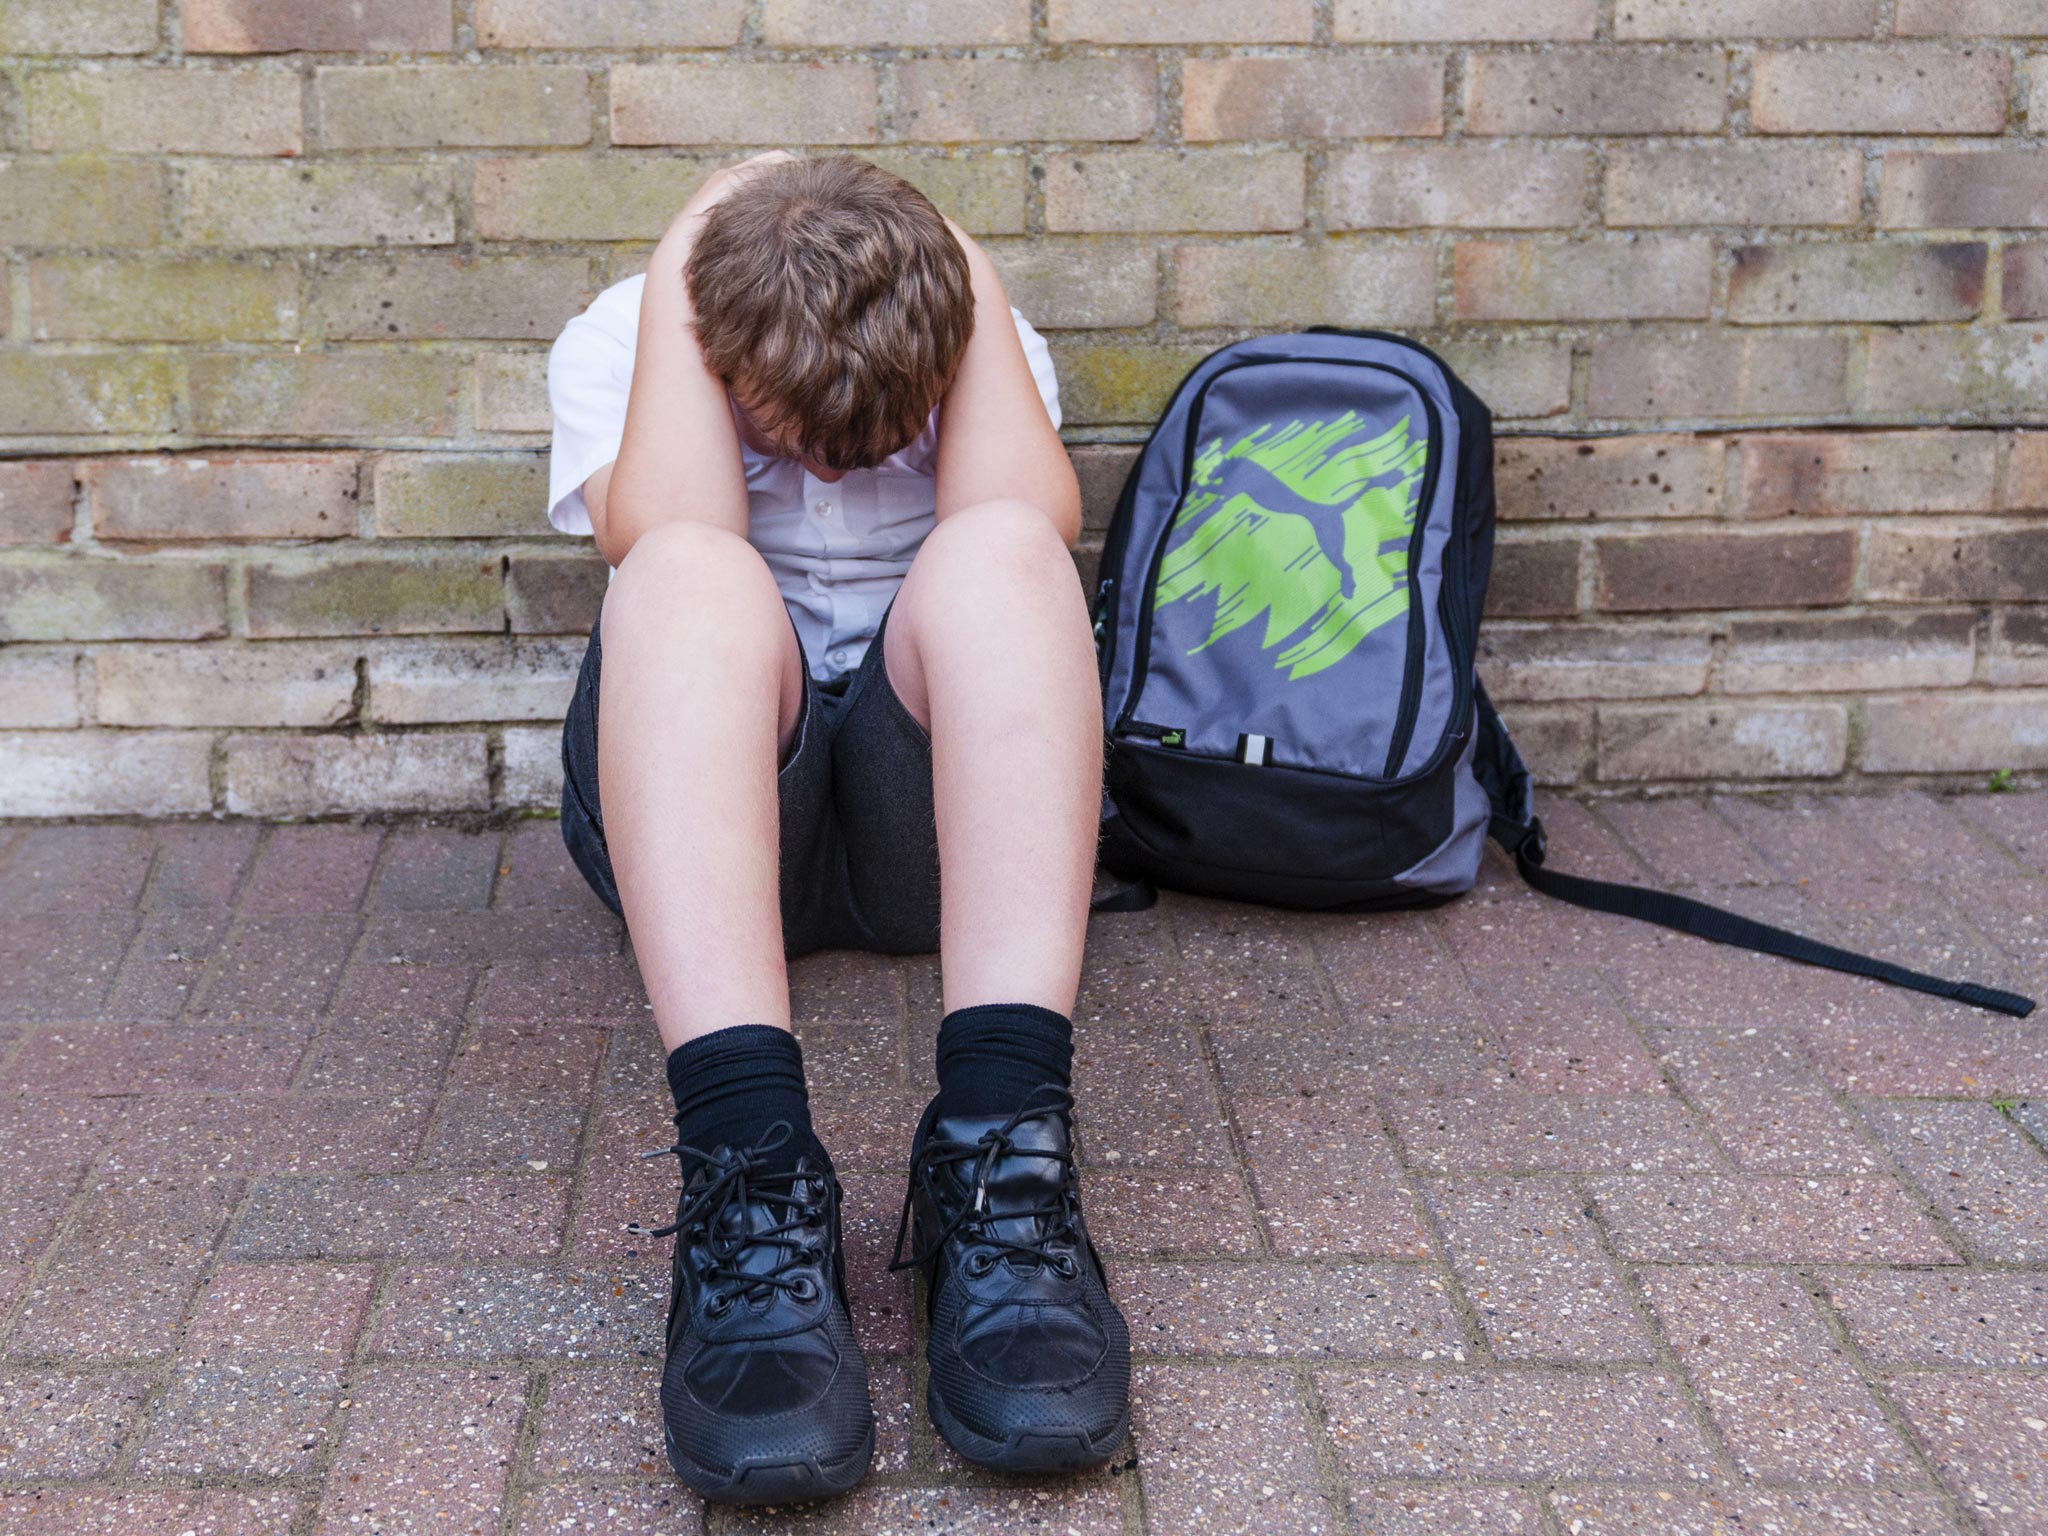 A new study shows 12 per cent of seven-year-olds with special educational needs claimed they were being bullied "all the time"